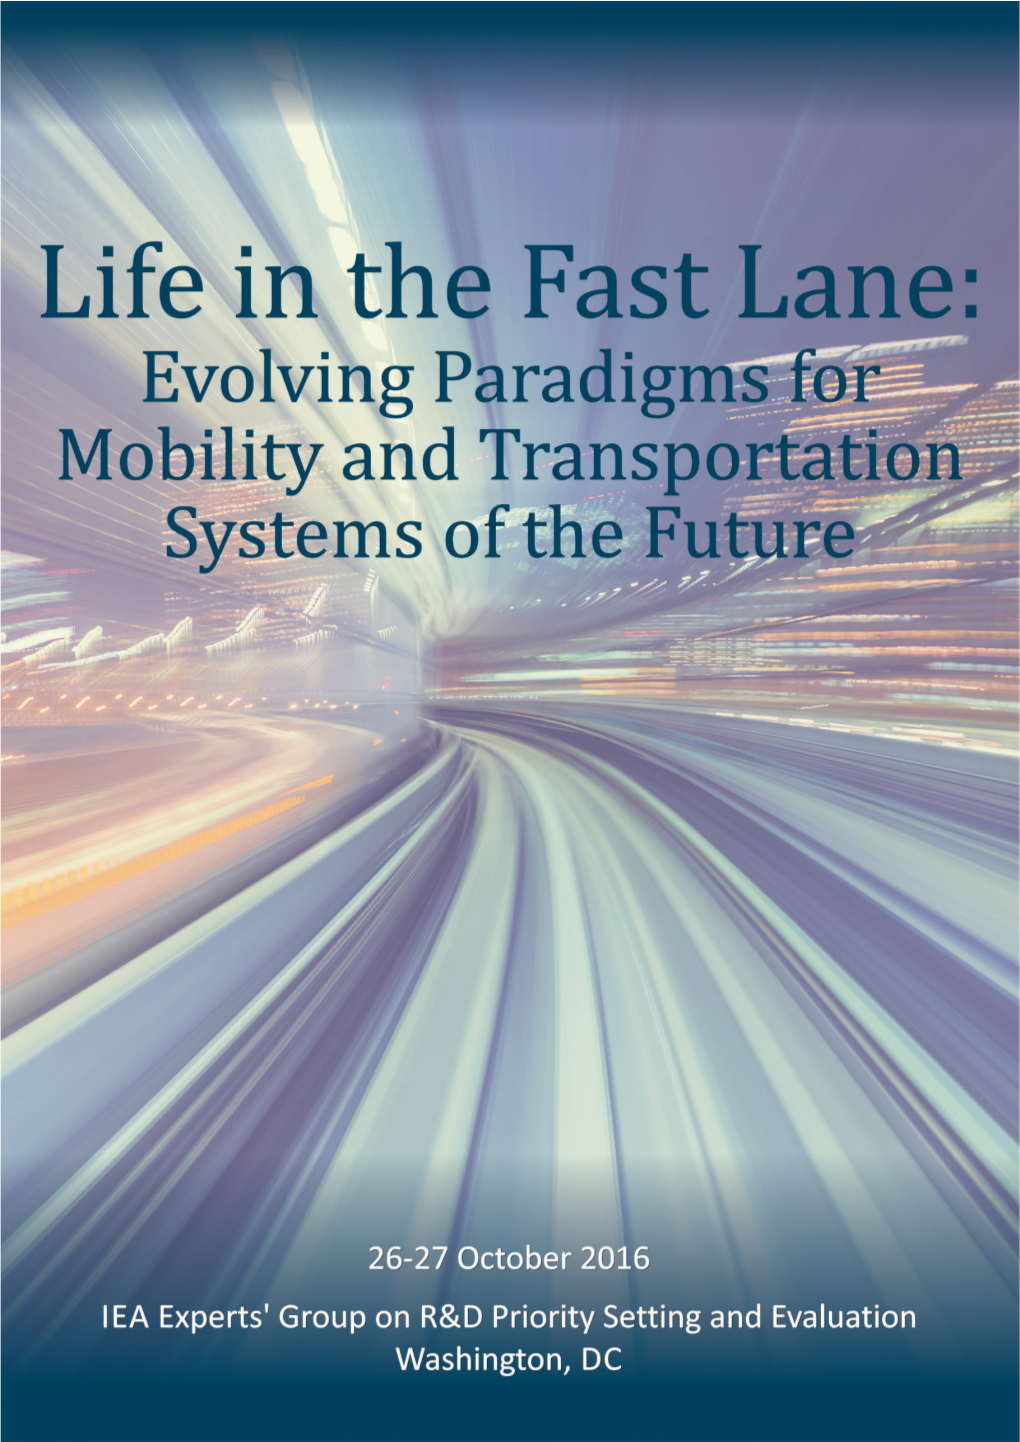 Life in the Fast Lane: Evolving Paradigms for Mobility